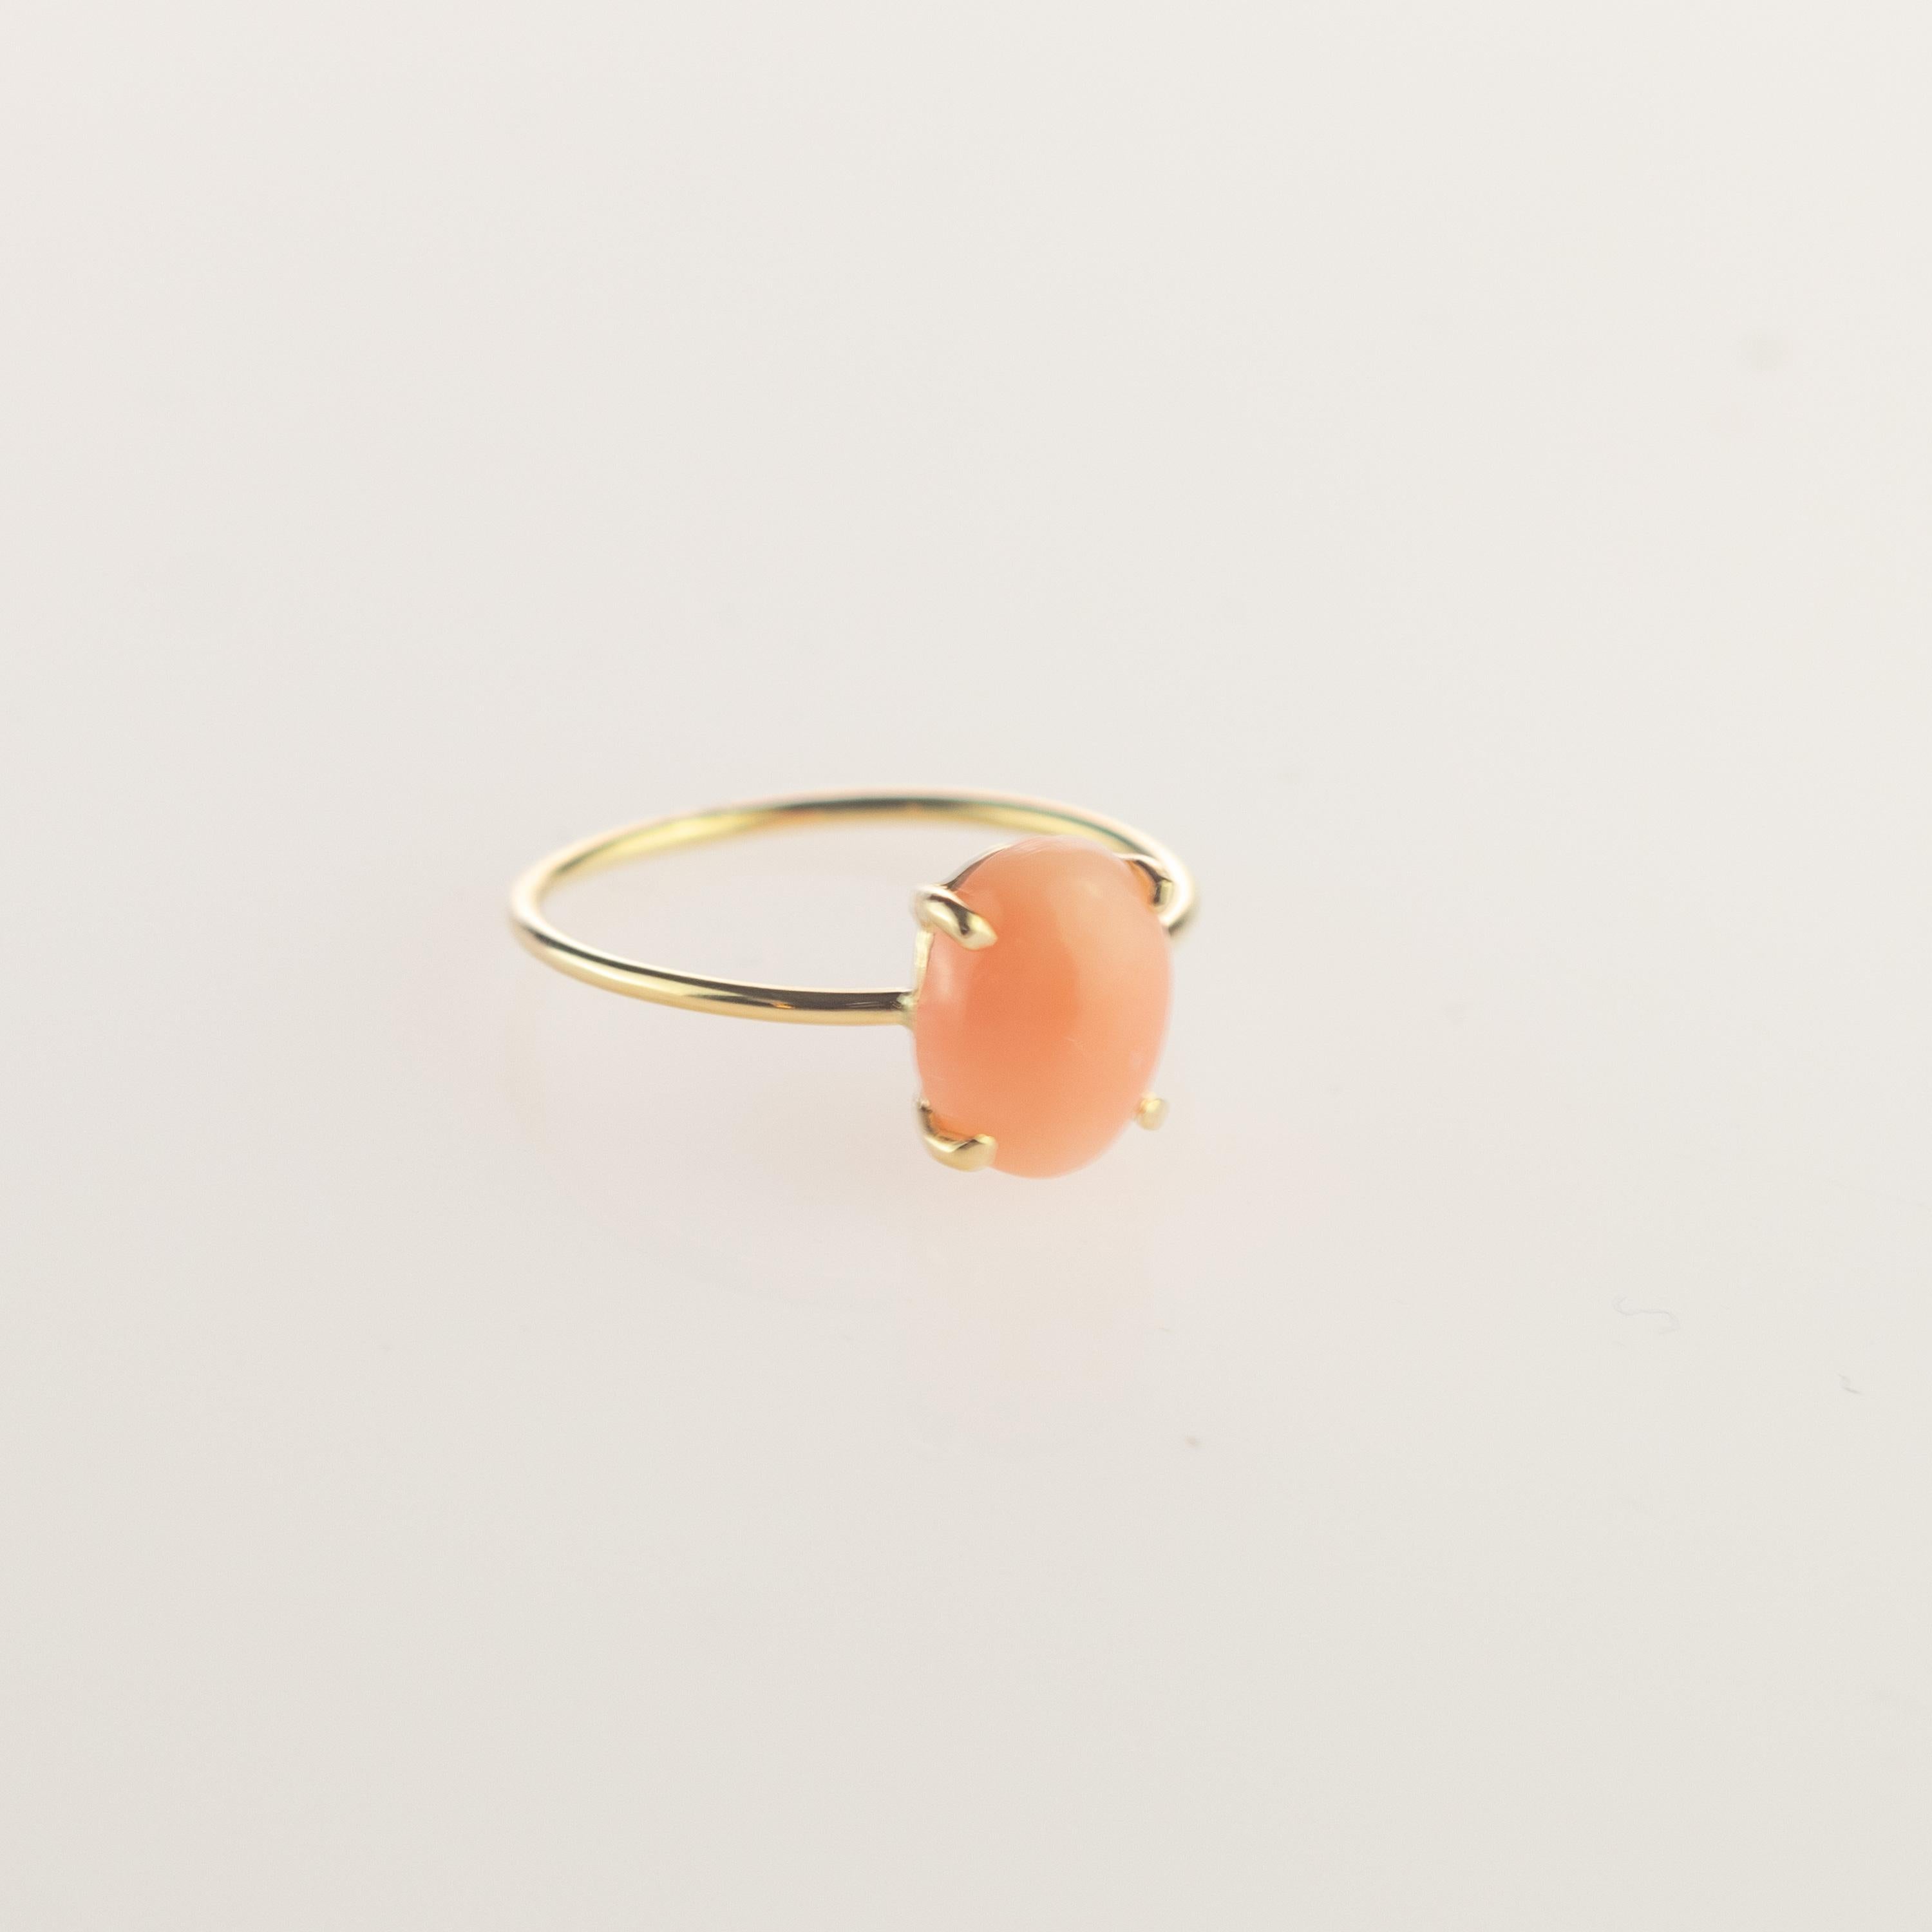 Intini Jewels 18 Karat Gold Oval 2 Carat Pink Coral Cocktail Handmade Ring For Sale 3